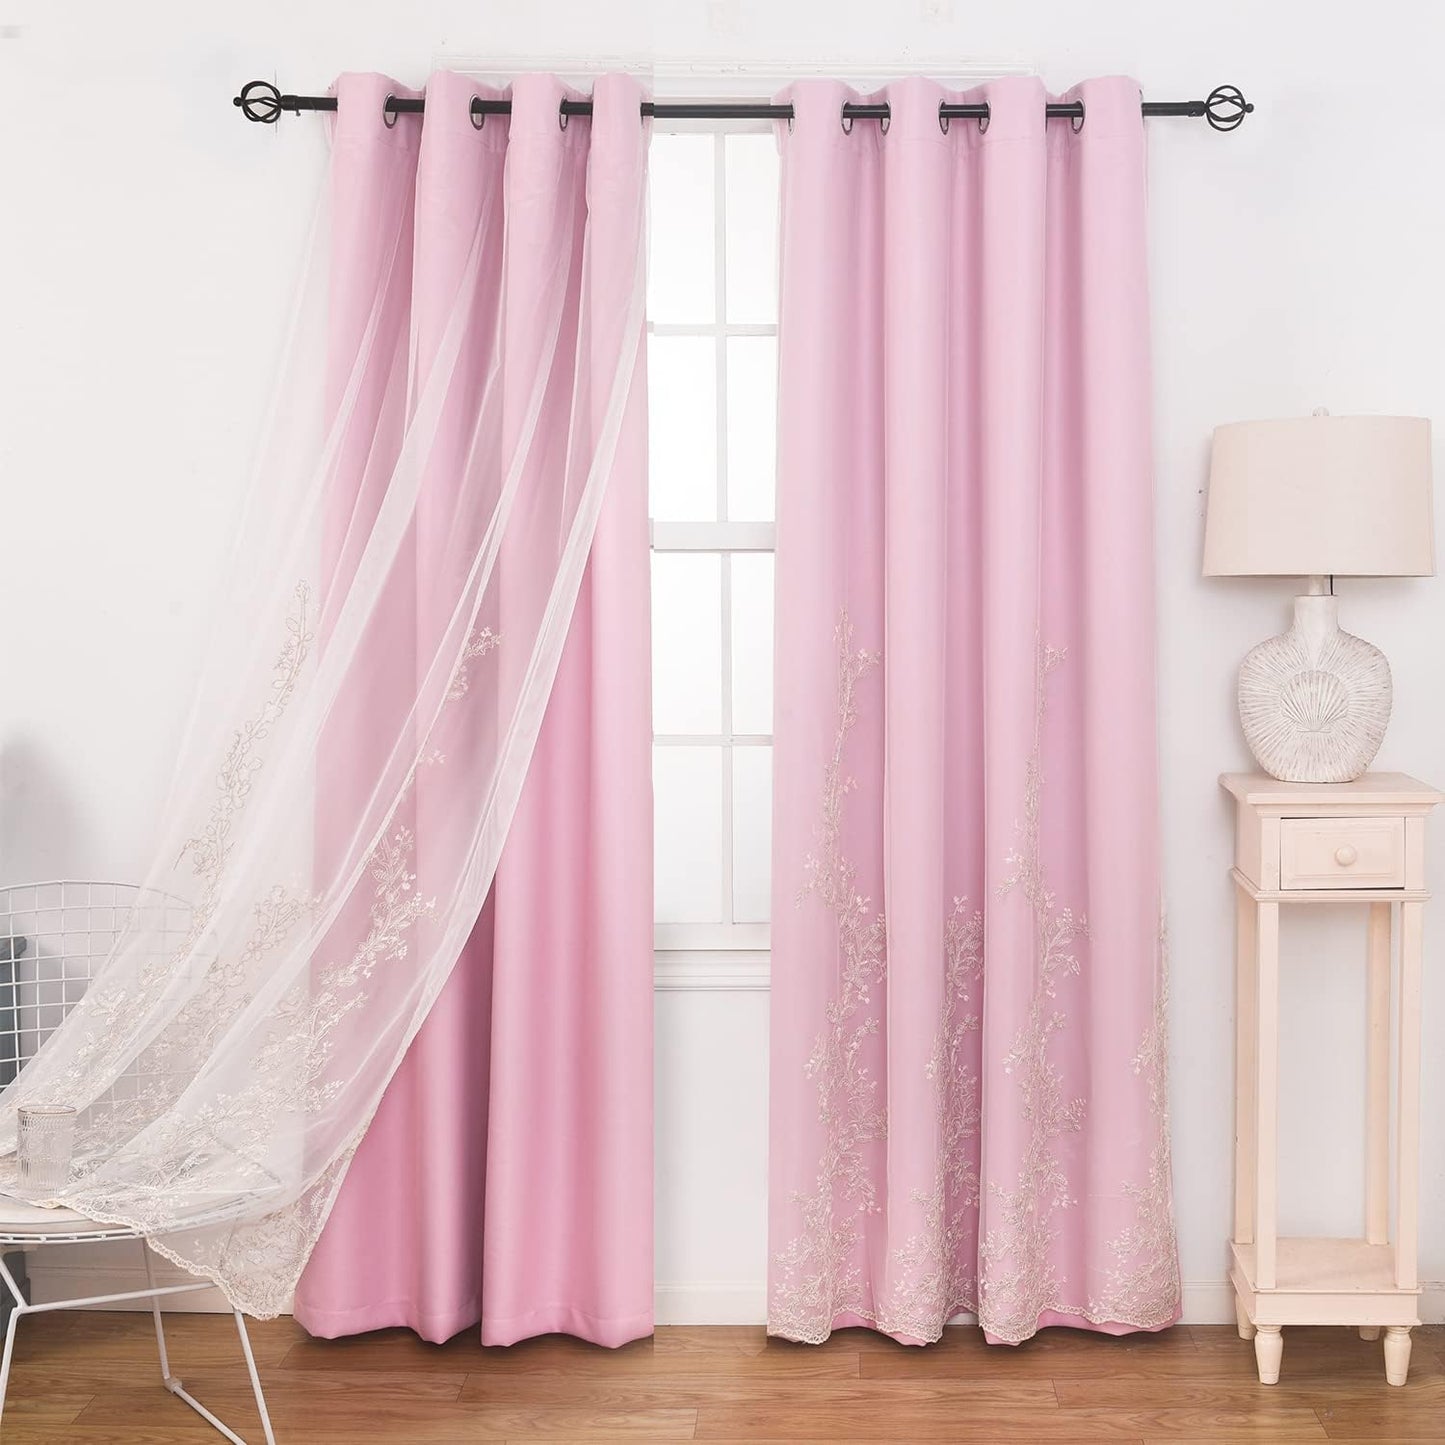 GYROHOME Double Layered Curtains with Embroidered White Sheer Tulle, Mix and Match Curtains Room Darkening Grommet Top Thermal Insulated Drapes,2Panels,52X84Inch,Beige  GYROHOME Pink 52Wx63Lx2 